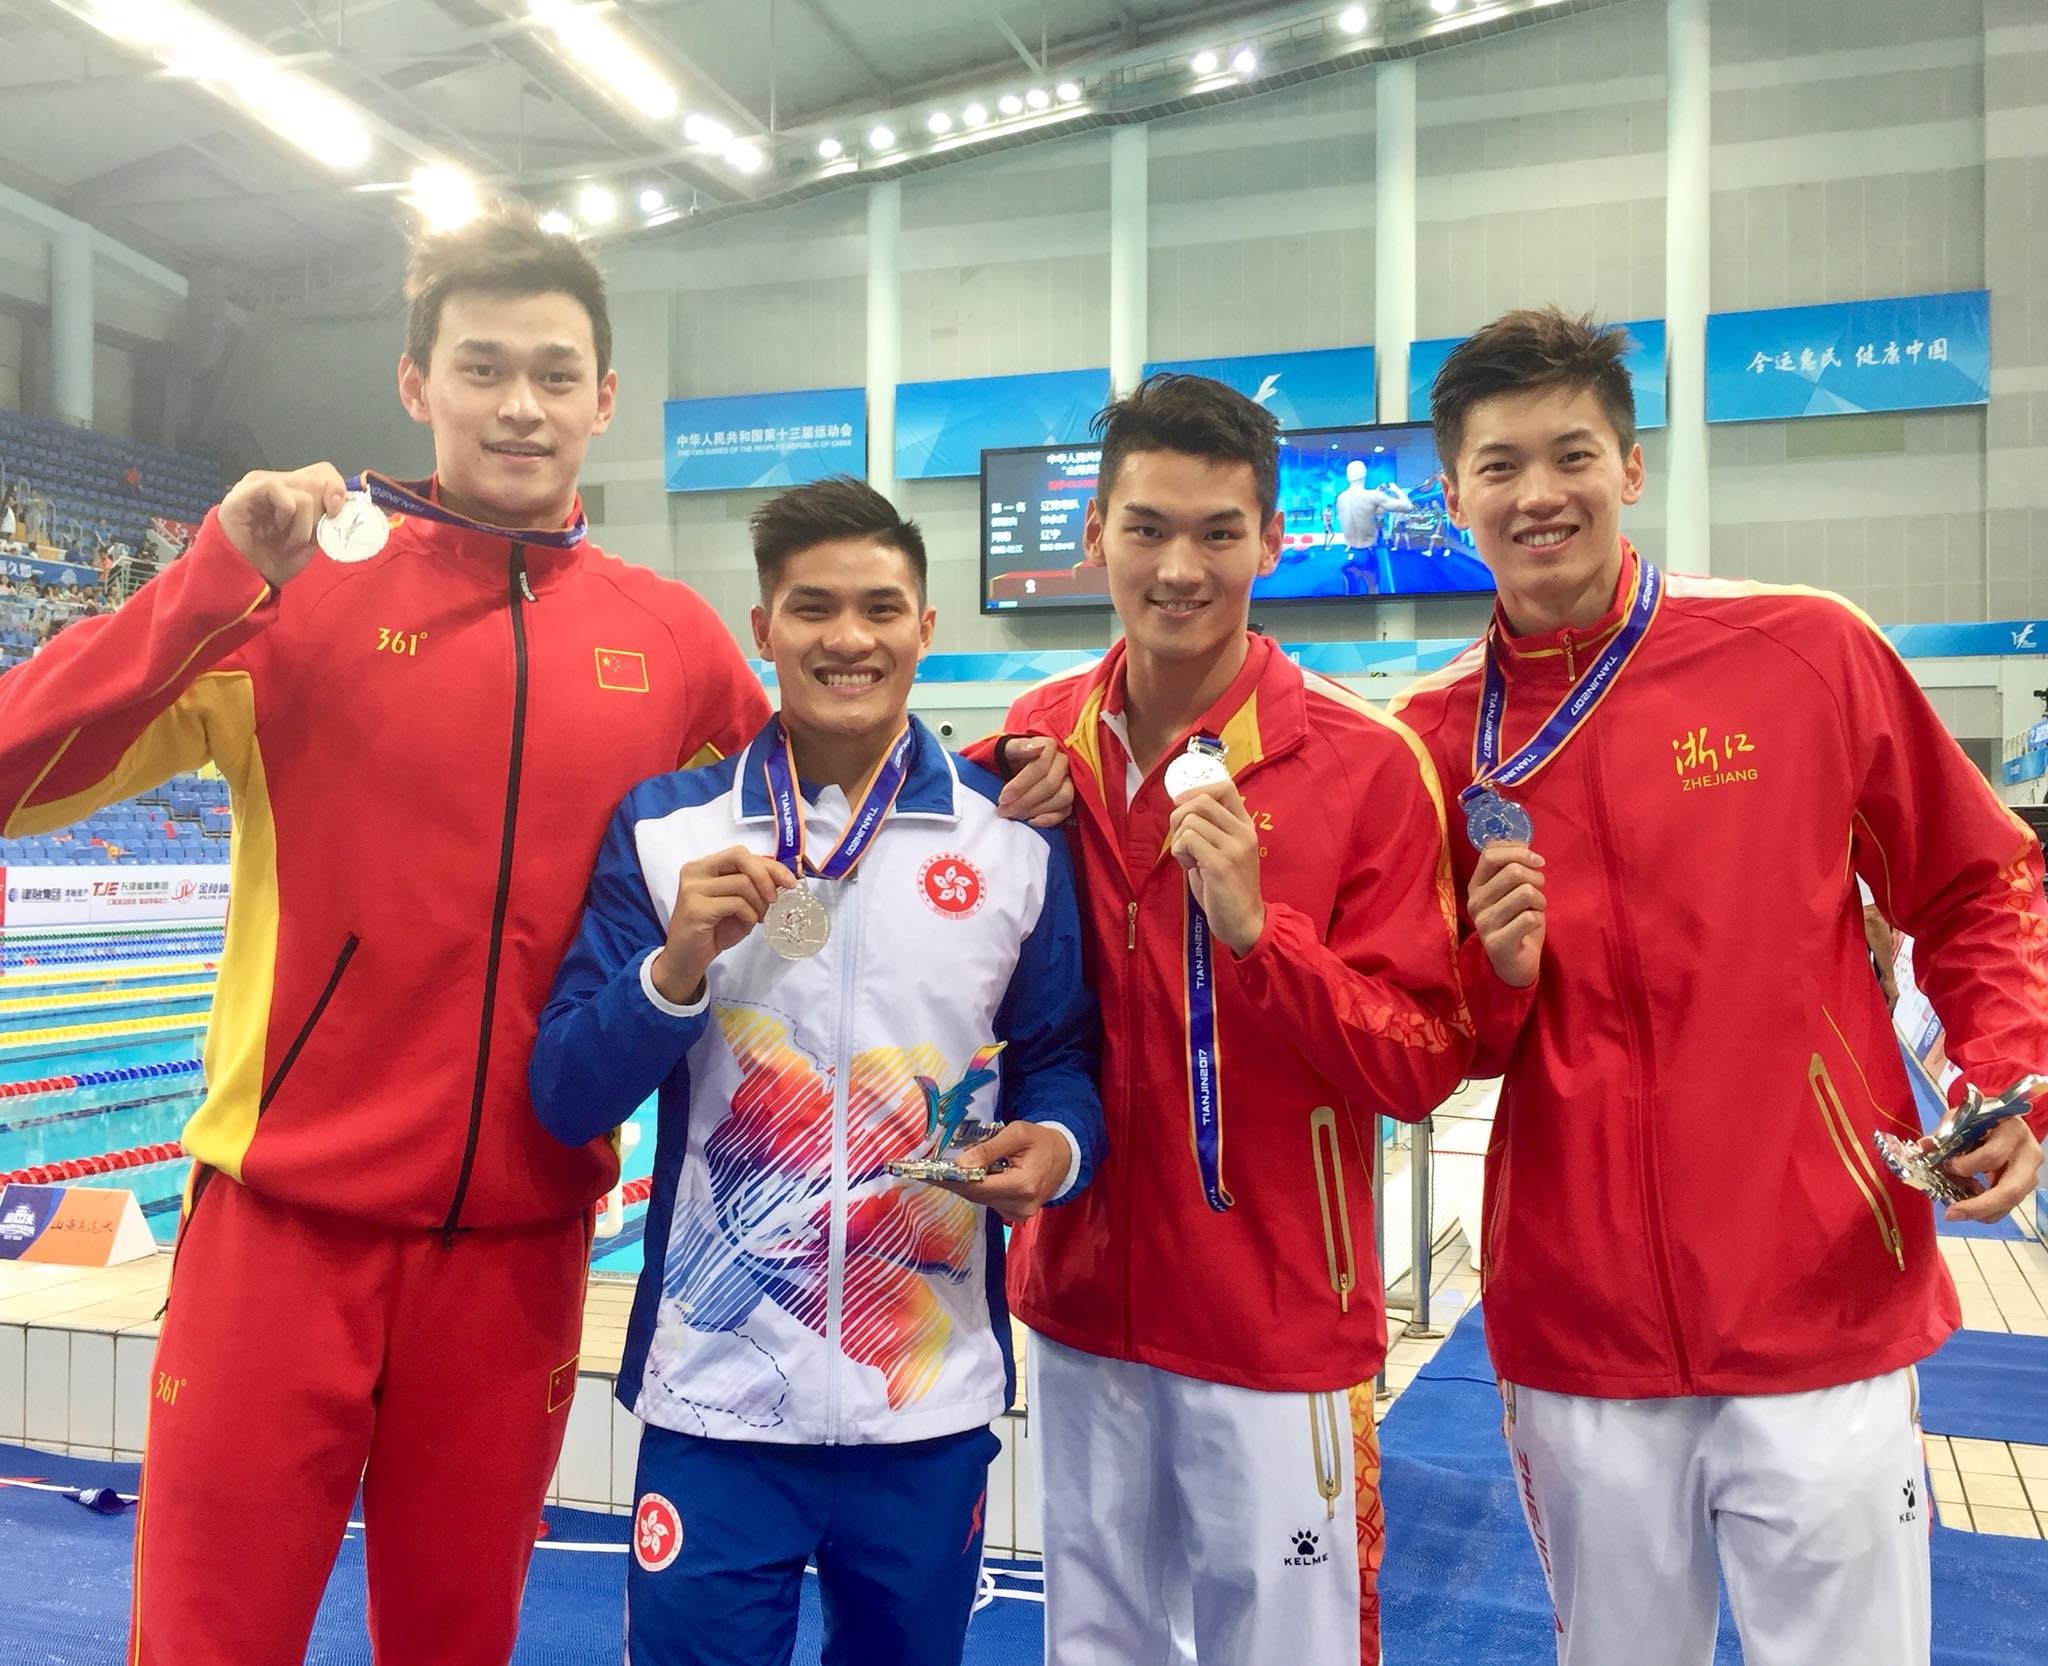 Kenneth To King-him with Sun Yang (left) and the other Zhejiang swimmers, Wang Shun and Xu Jiayu. Photo: Facebook / Kenneth To